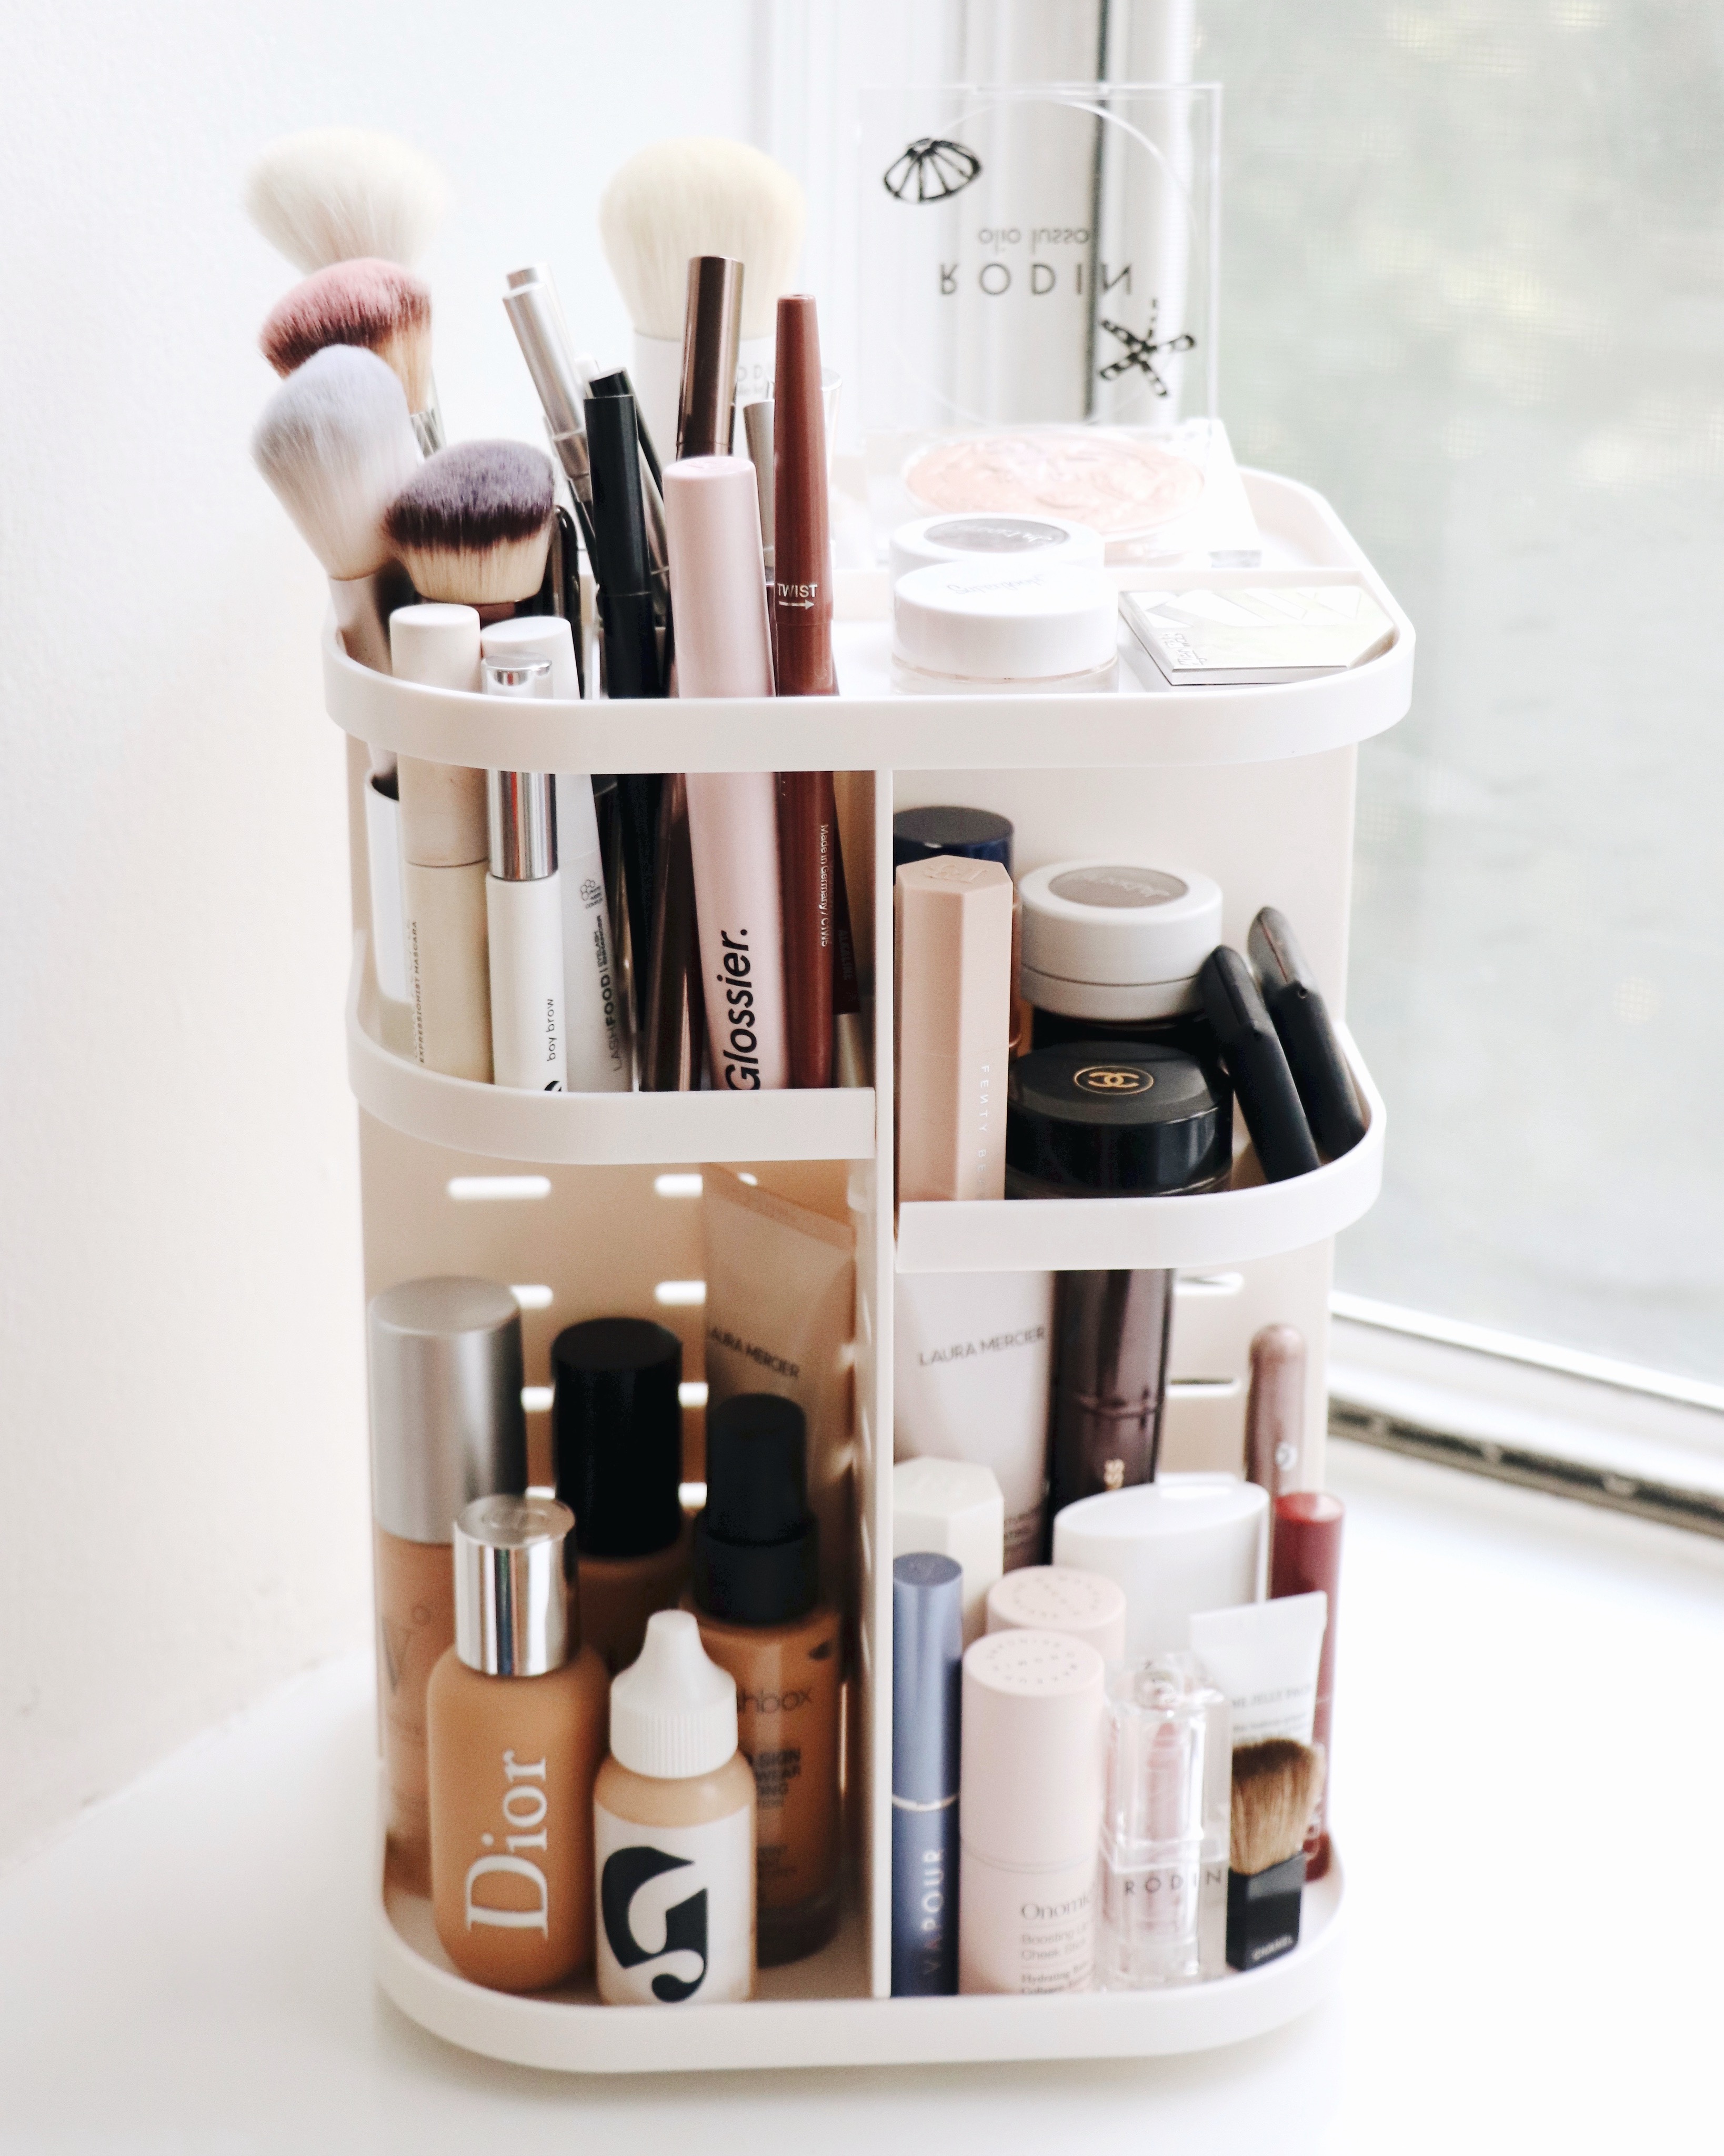 The Best Makeup Organizer For Your Vanity - collectionofvials.com